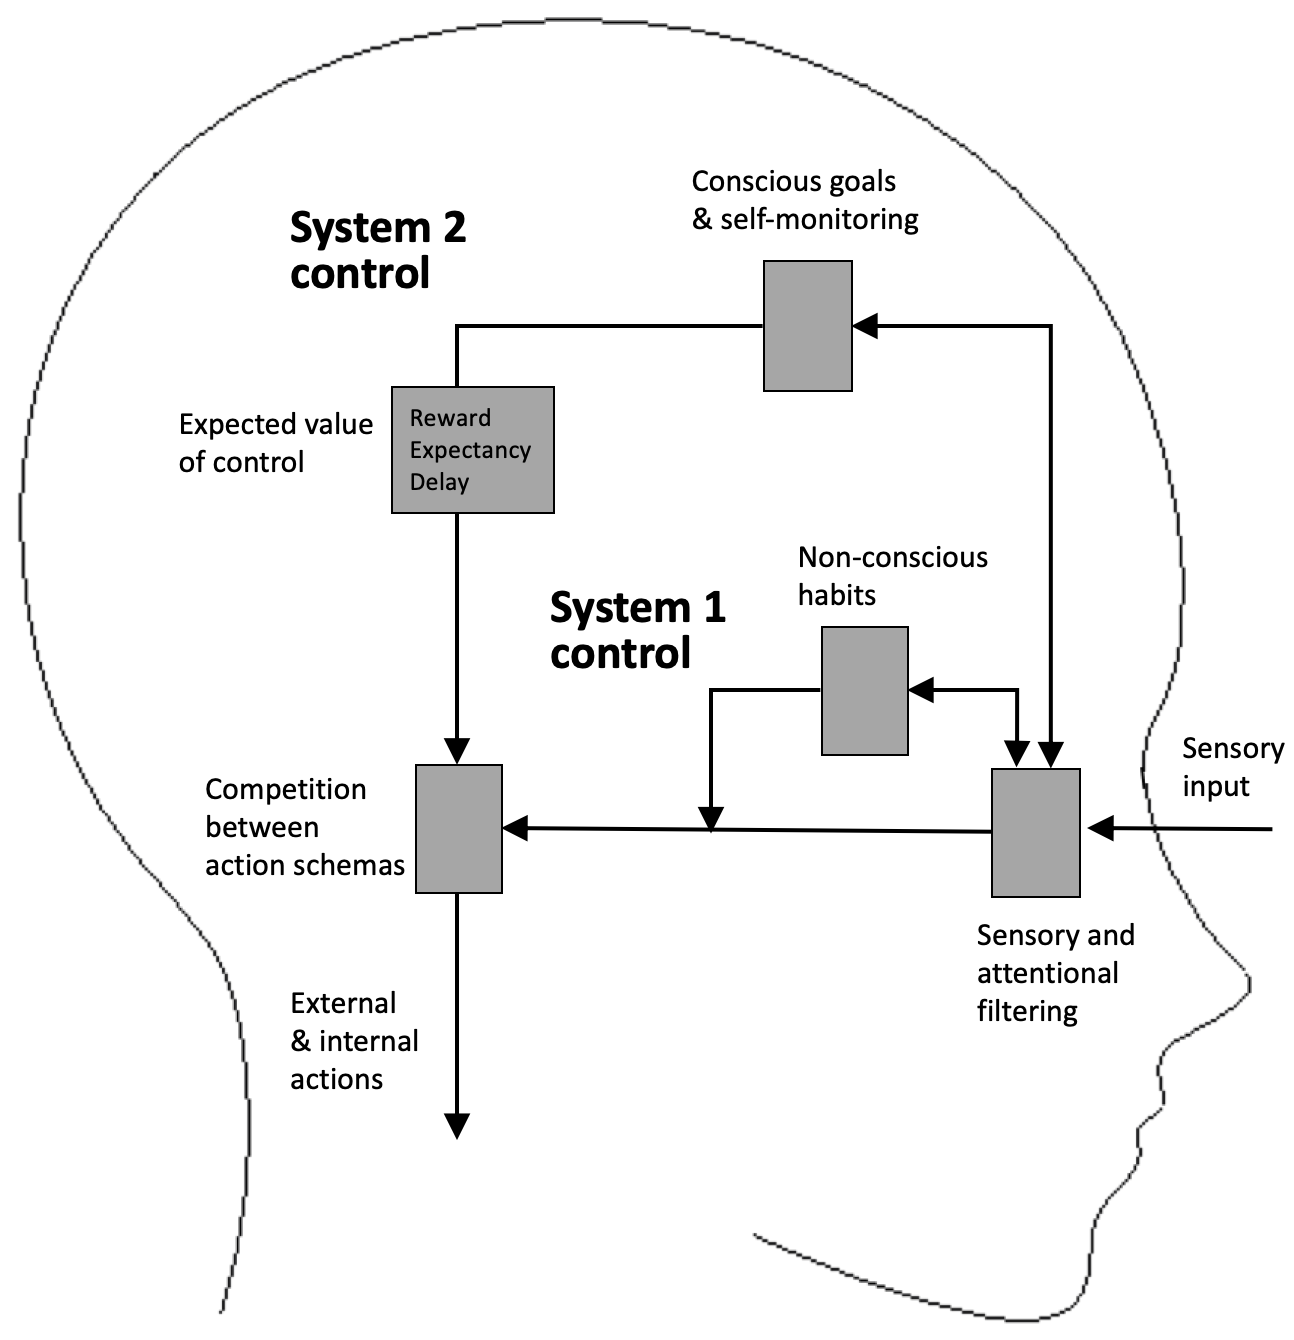 A summary of the dual systems model of self-regulation. **System 1** control refers to habits or instinctive responses that get triggered by external stimuli or internal states. **System 2** control refers to behaviour triggered by consciously held goals or intentions. **Self-control** is to use conscious System 2 control to override System 1 responses when the two are in control. The strength of conscious self-control depends on the **expected value of control**, a cost-benefit analysis of what you might gain from exercising self-control.